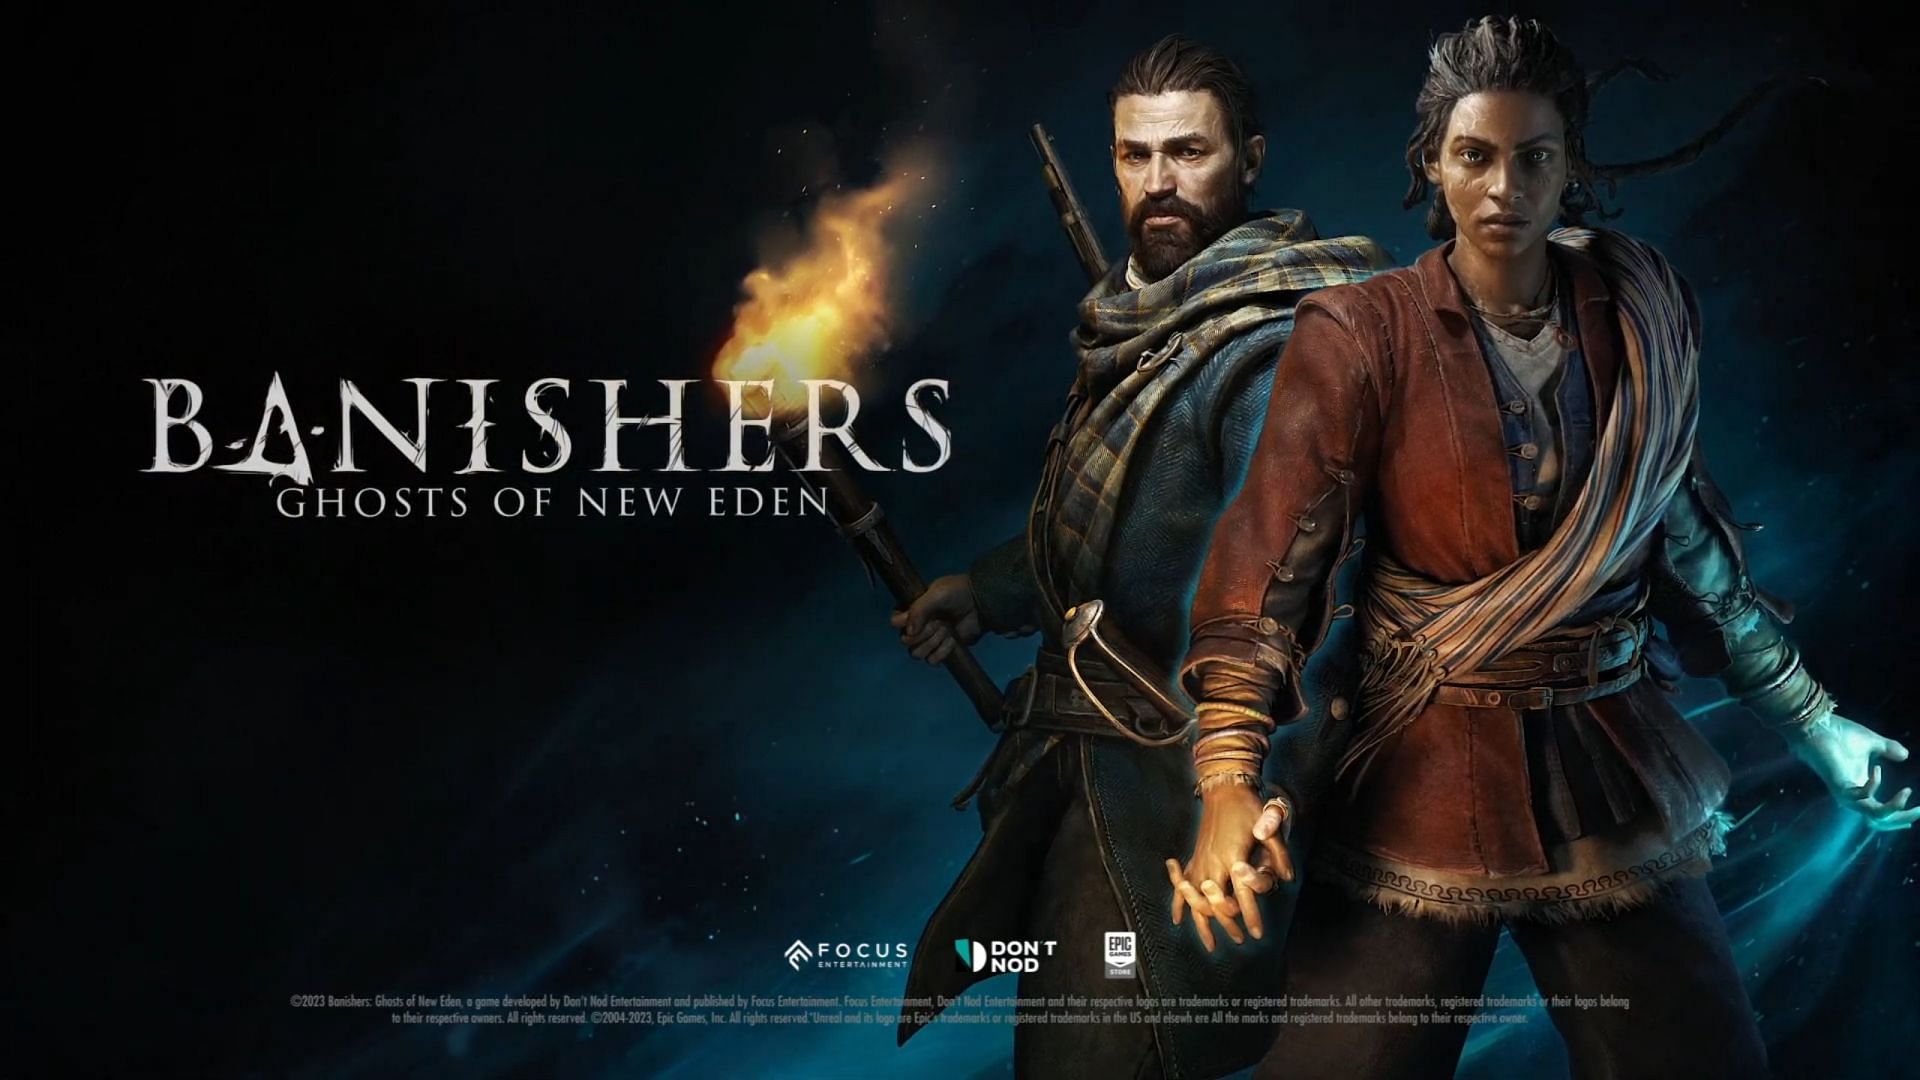 The new action RPG - Banishers: Ghosts of New Eden (image by Don